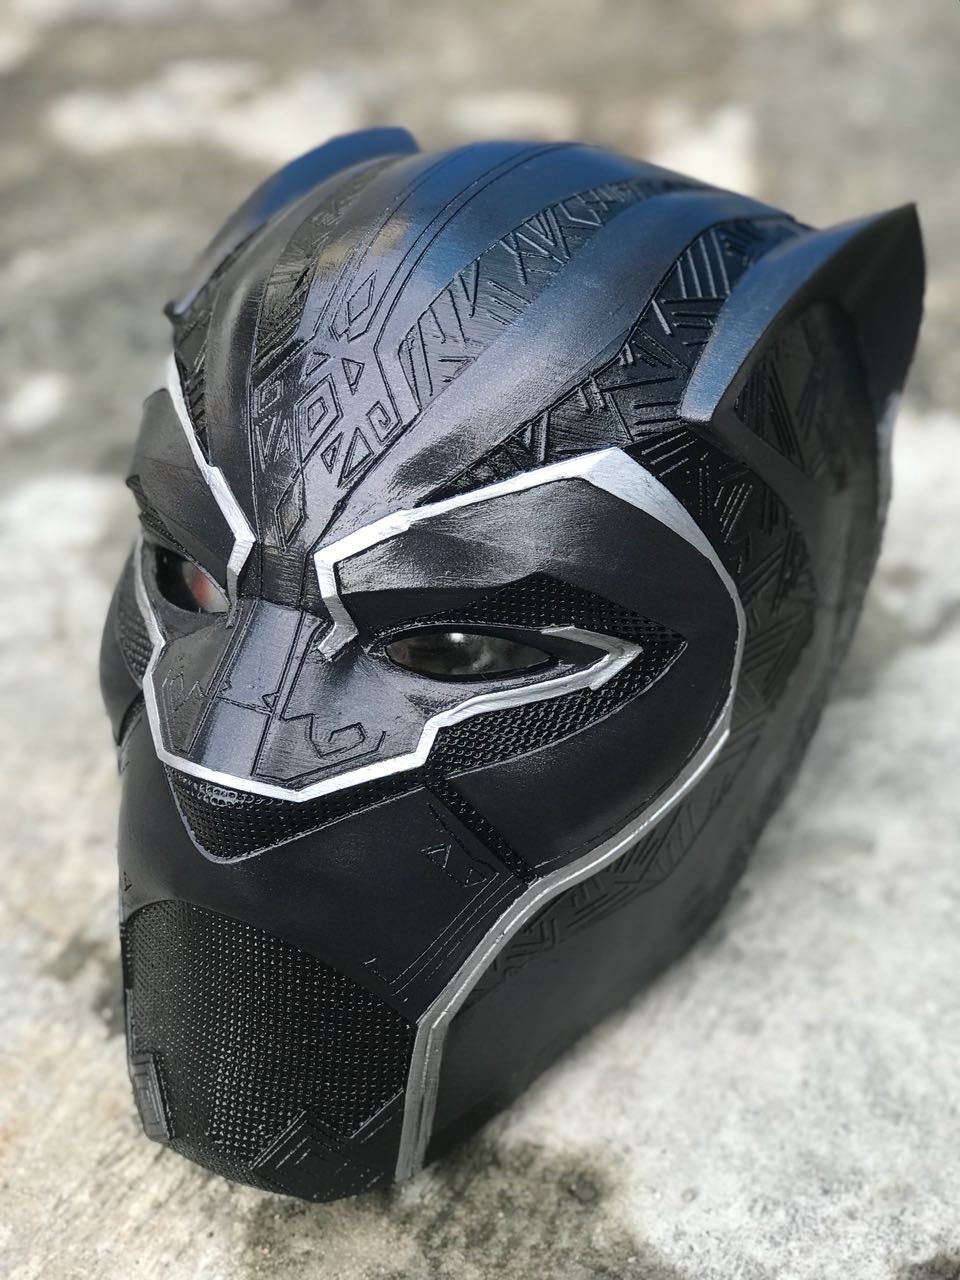 Black panther Infinity war mask 2018 Screen accurate | Etsy